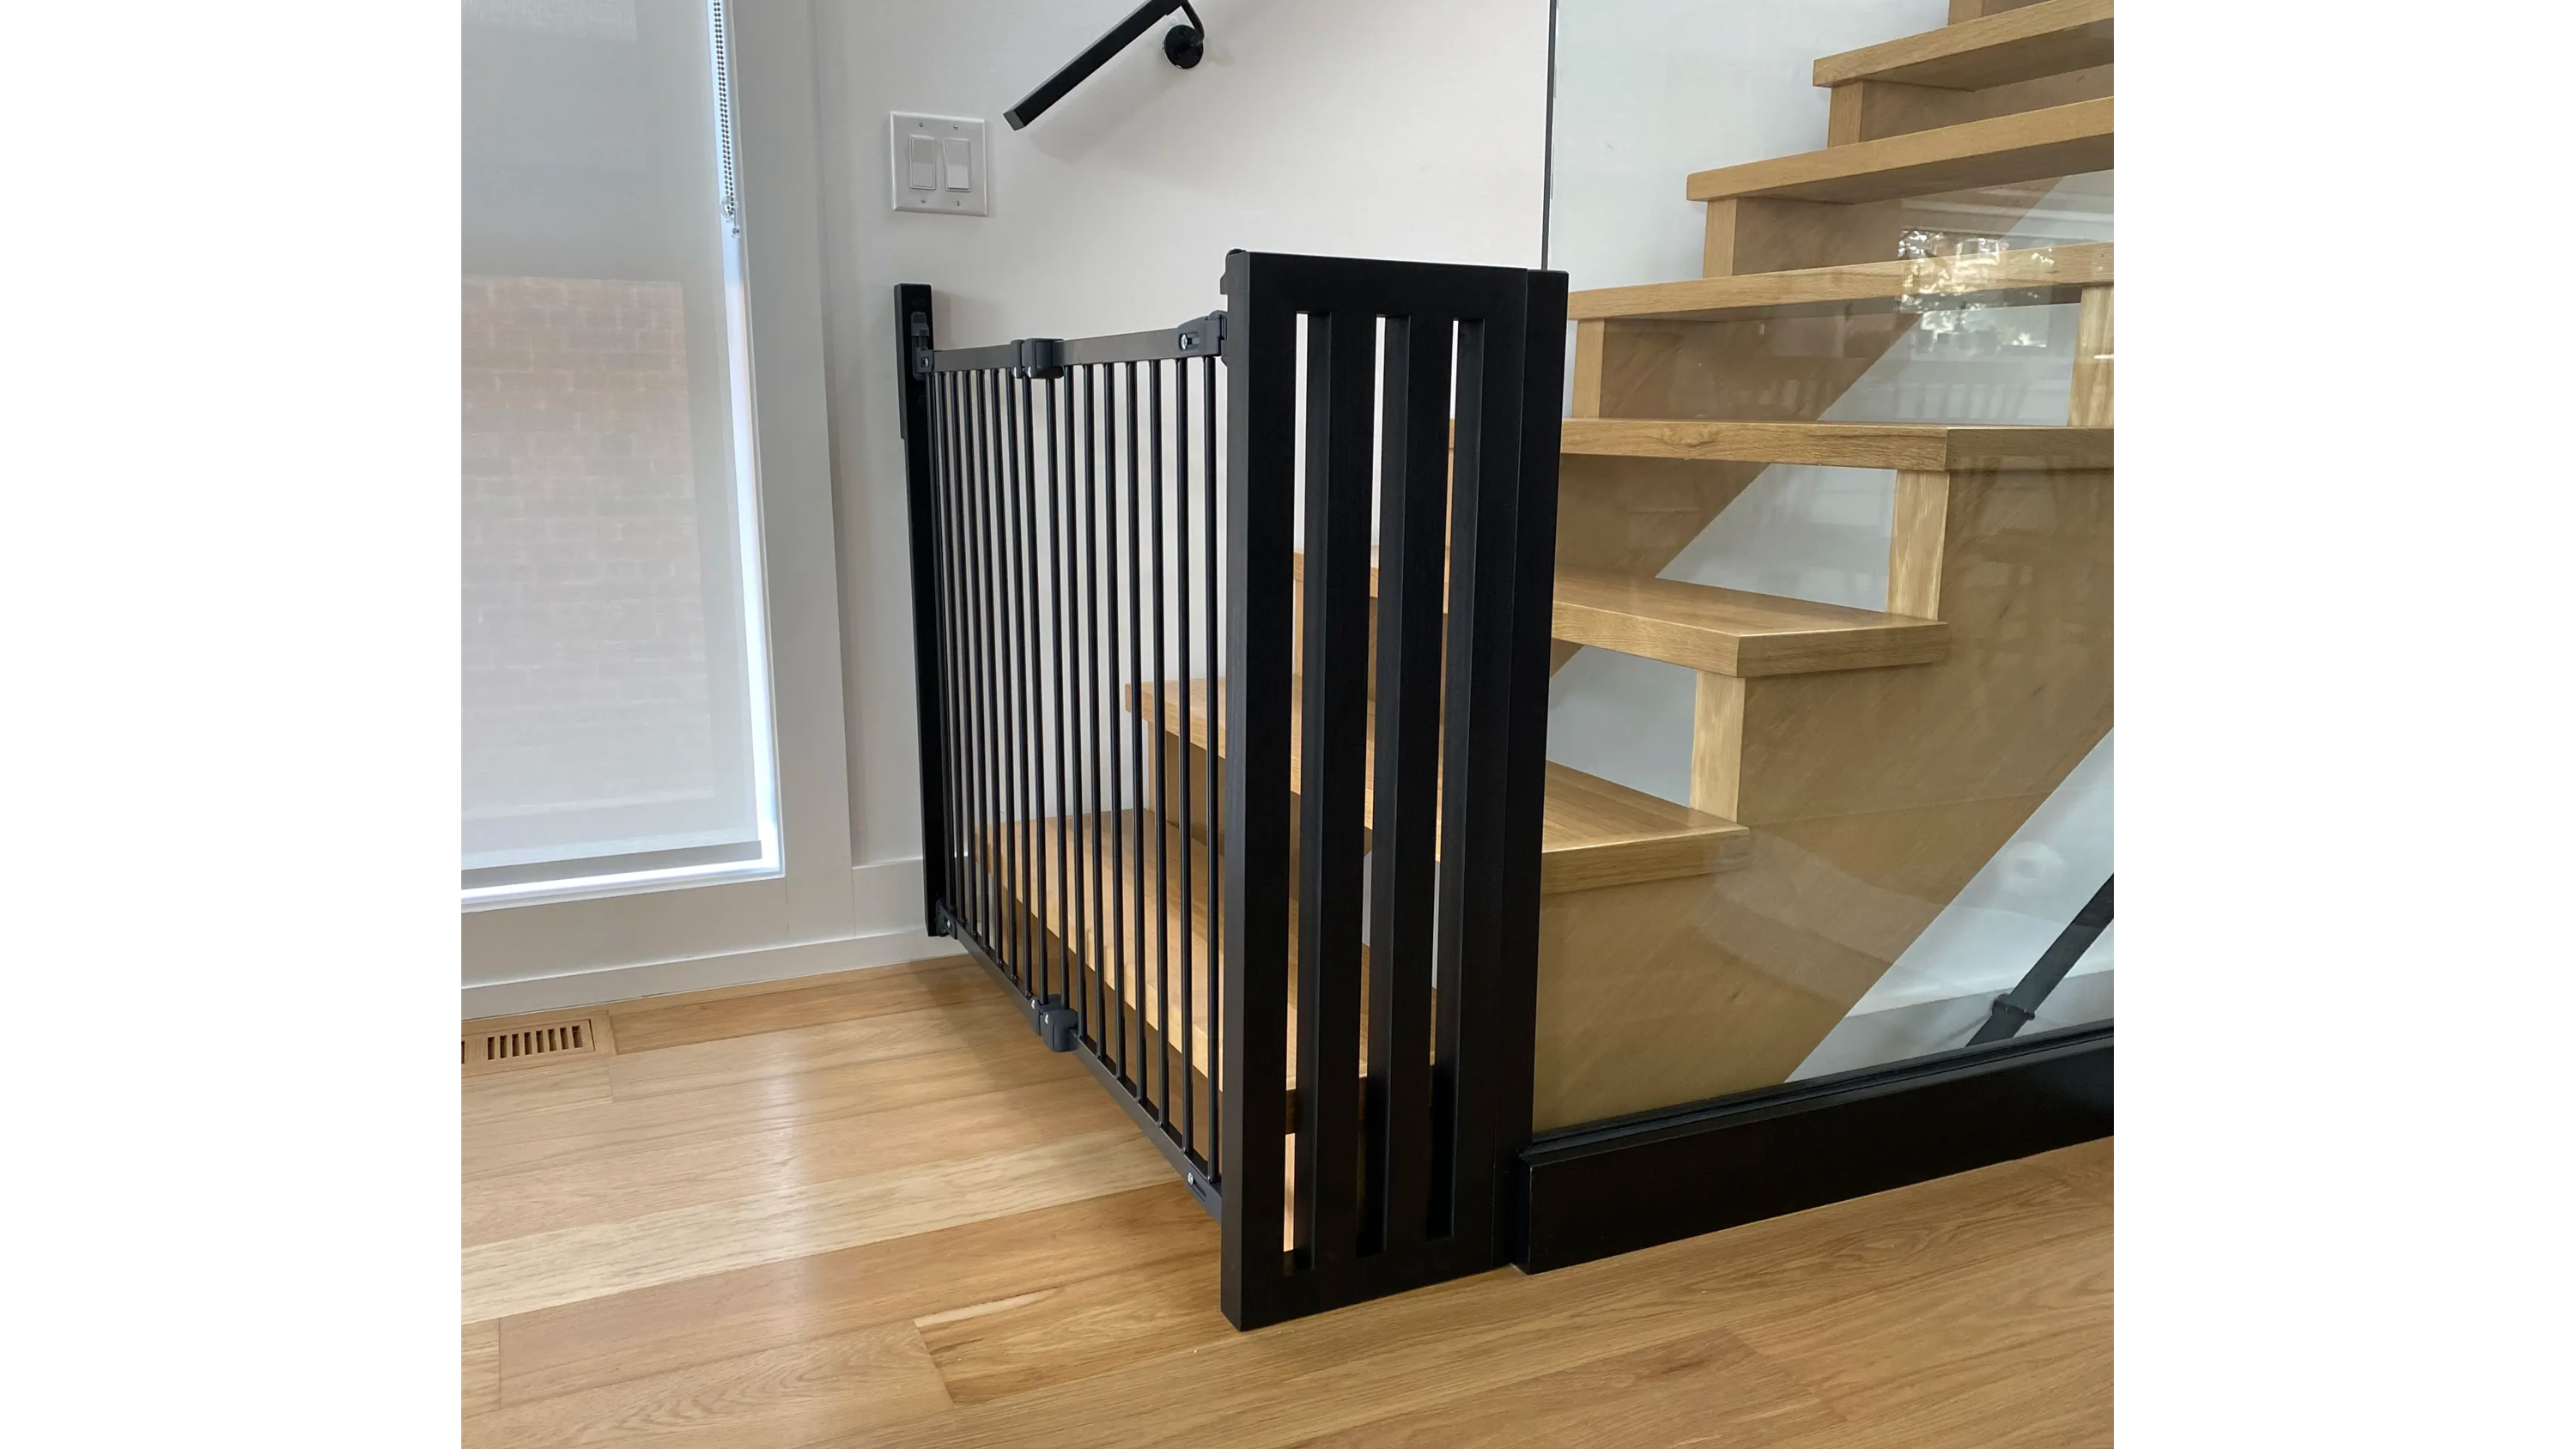 A gate with custom buildout, installed in a customer's home.